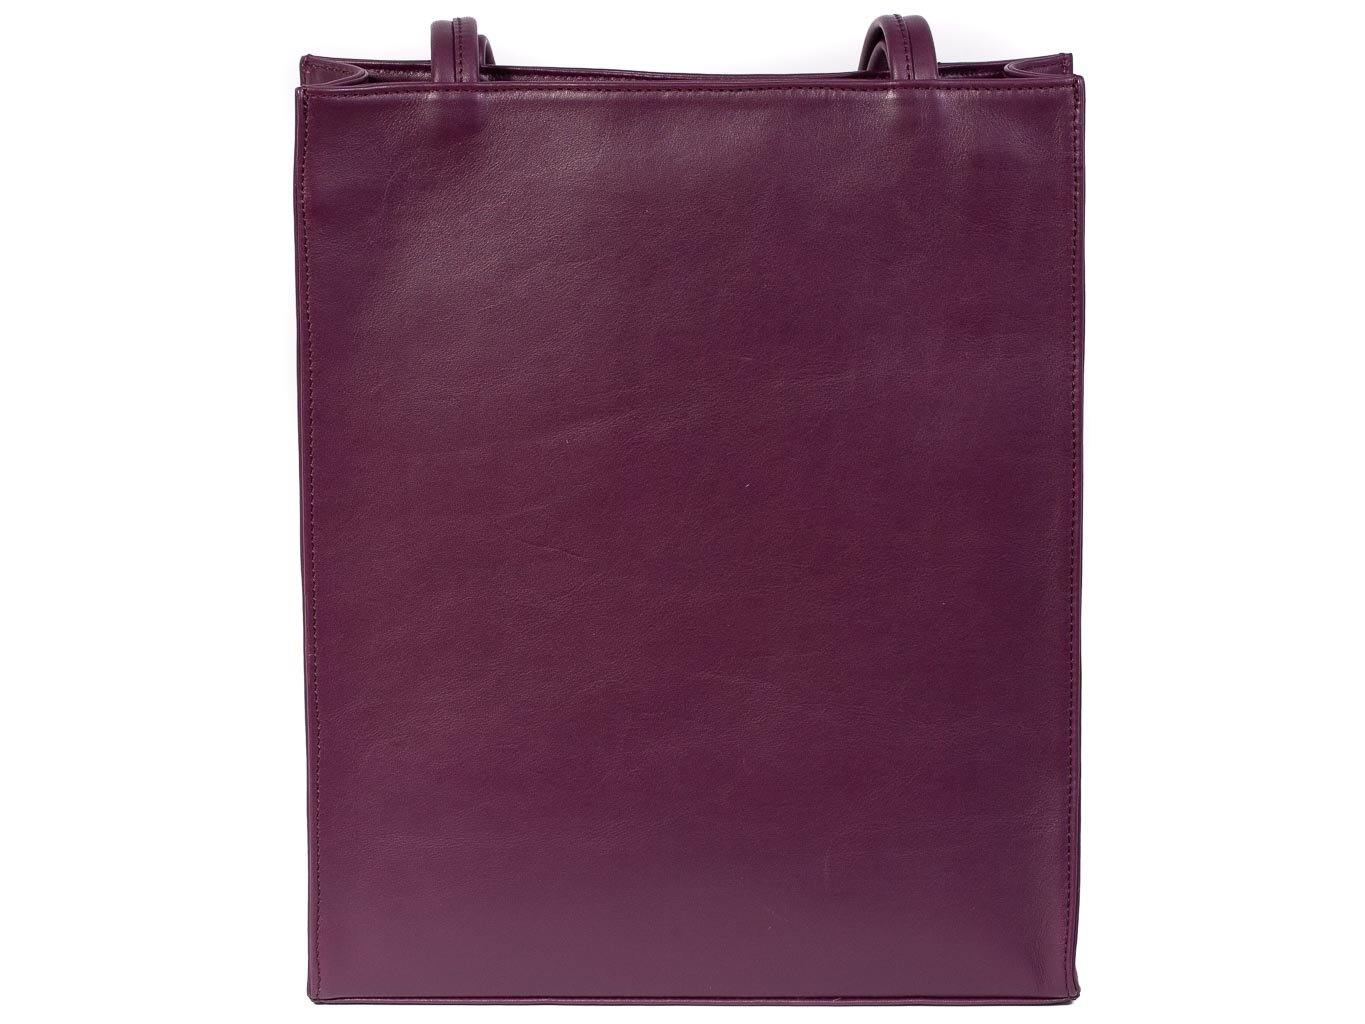 Tote Springbok Handbag in Deep Purple with a fan feature by Sherene Melinda back